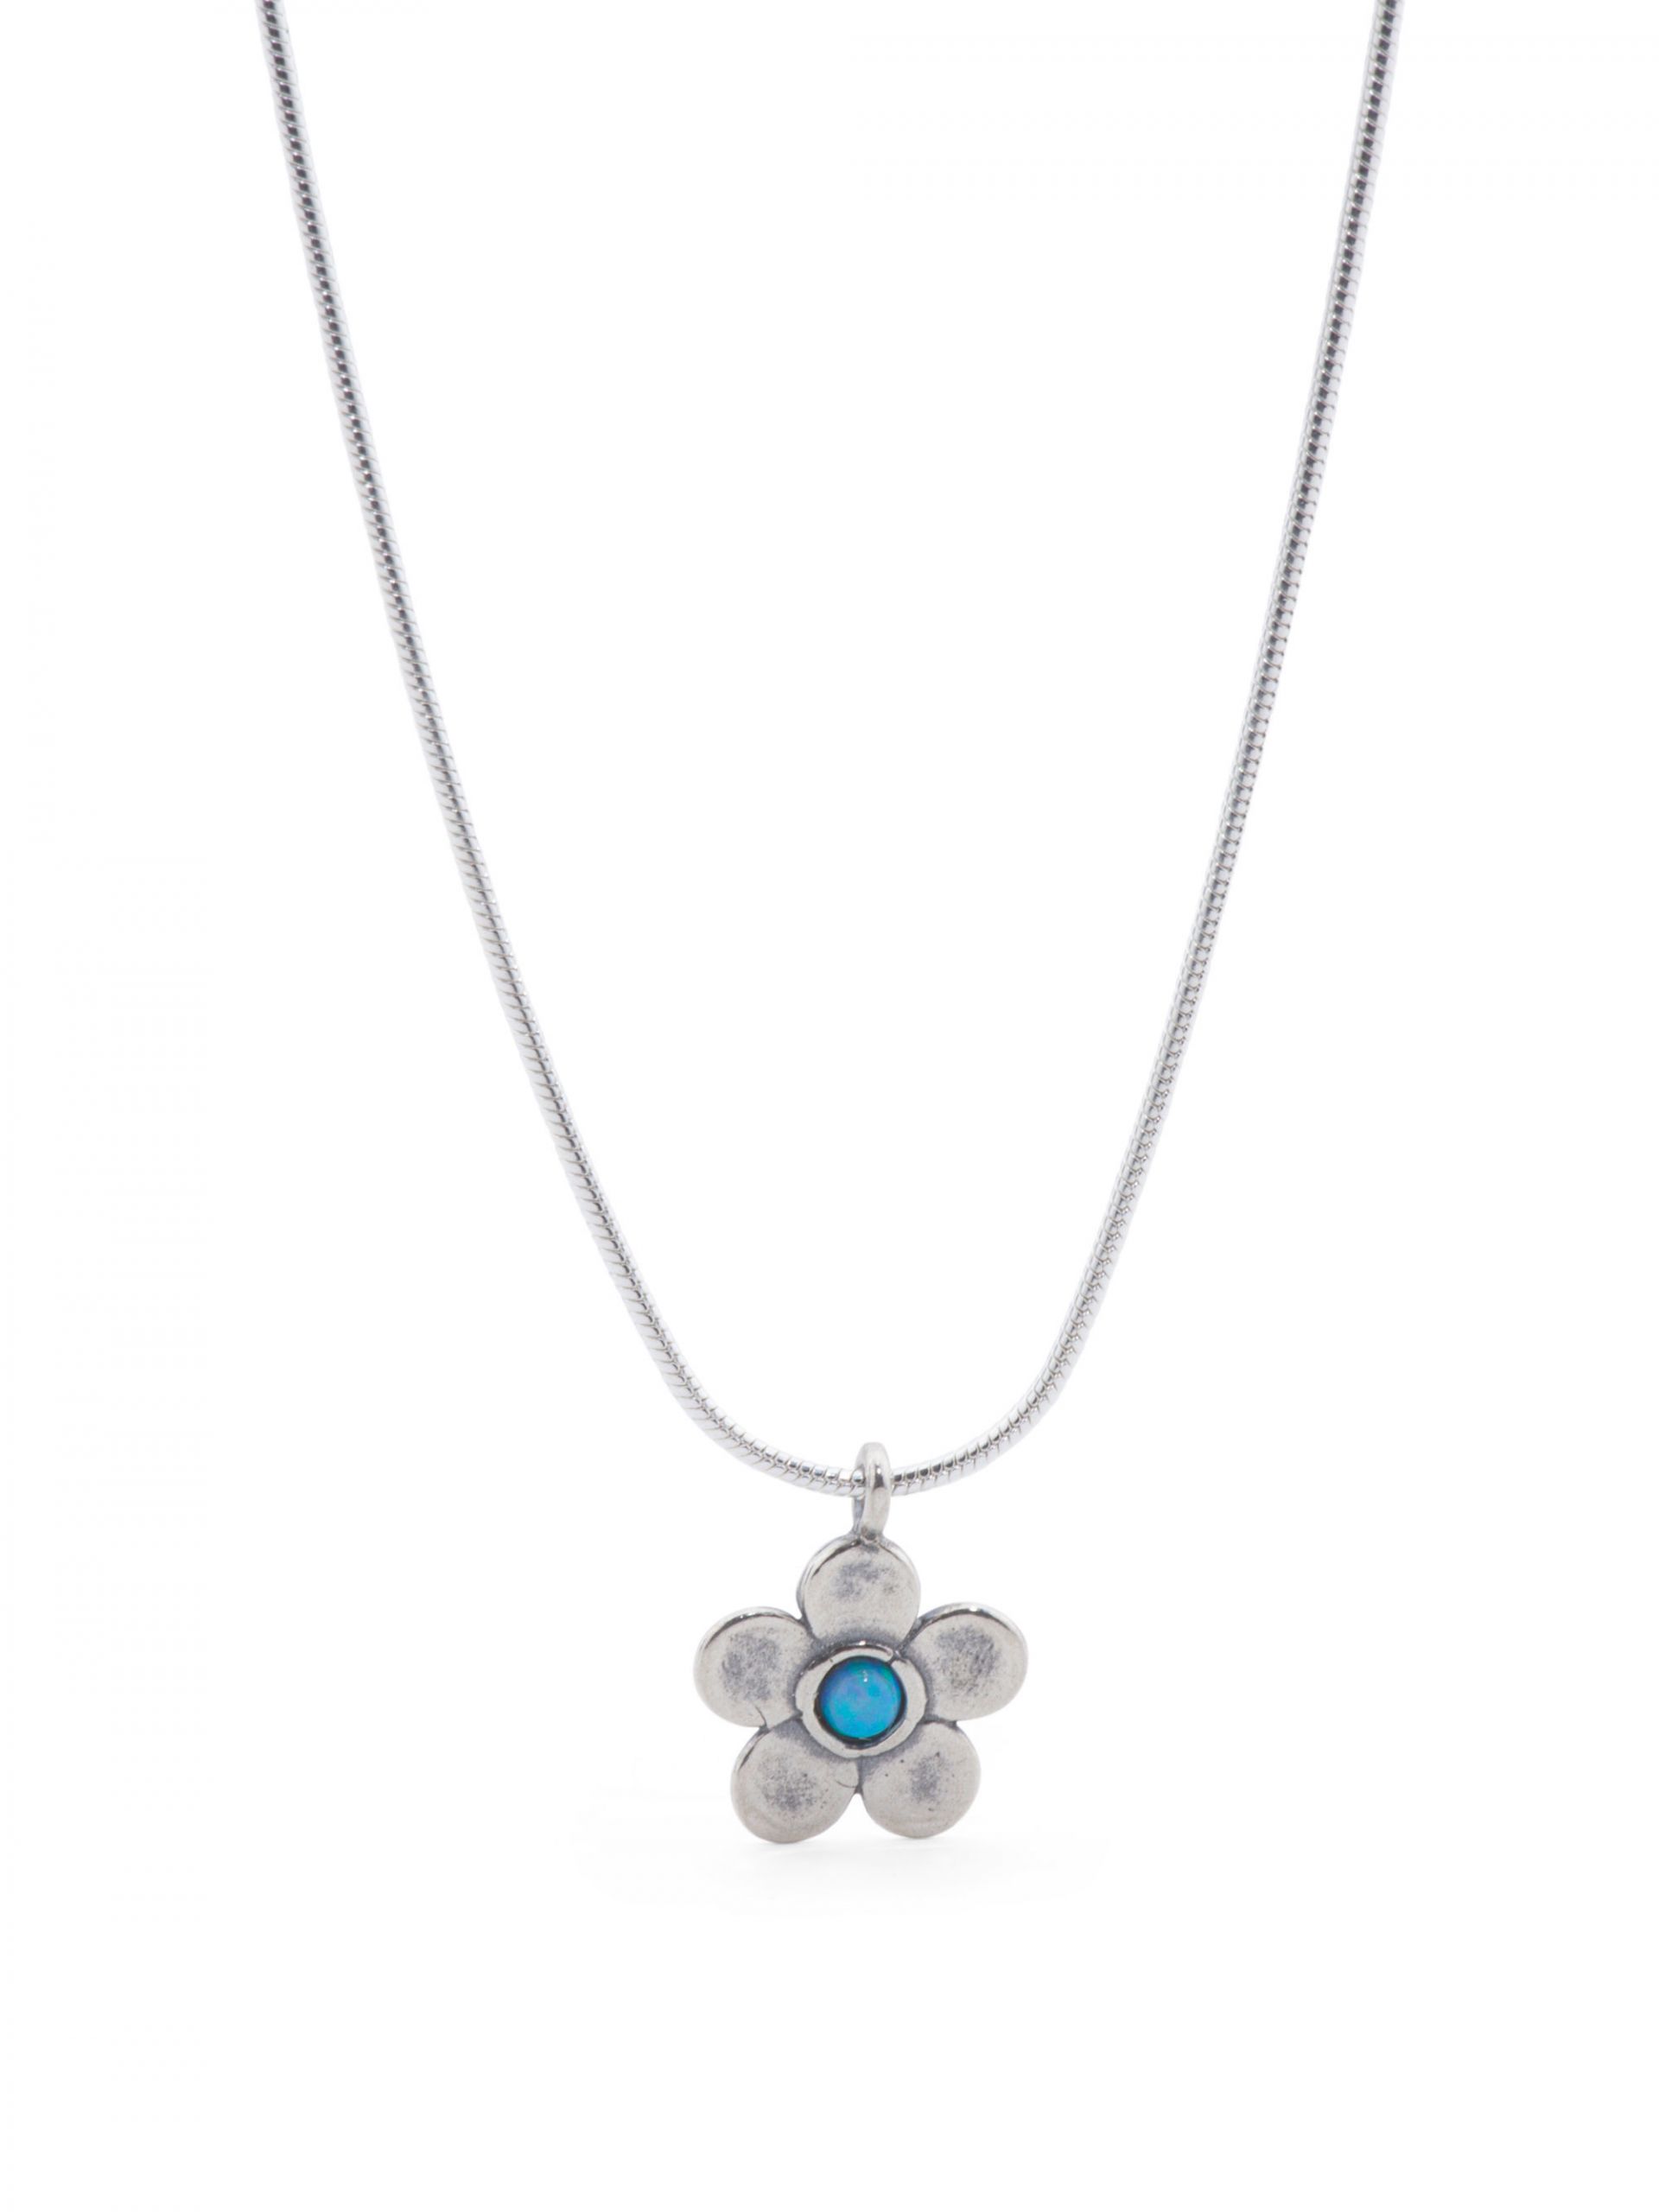 Tj Maxx Jewelry Necklaces
 Tj maxx Made In Israel Sterling Silver Opal Flower